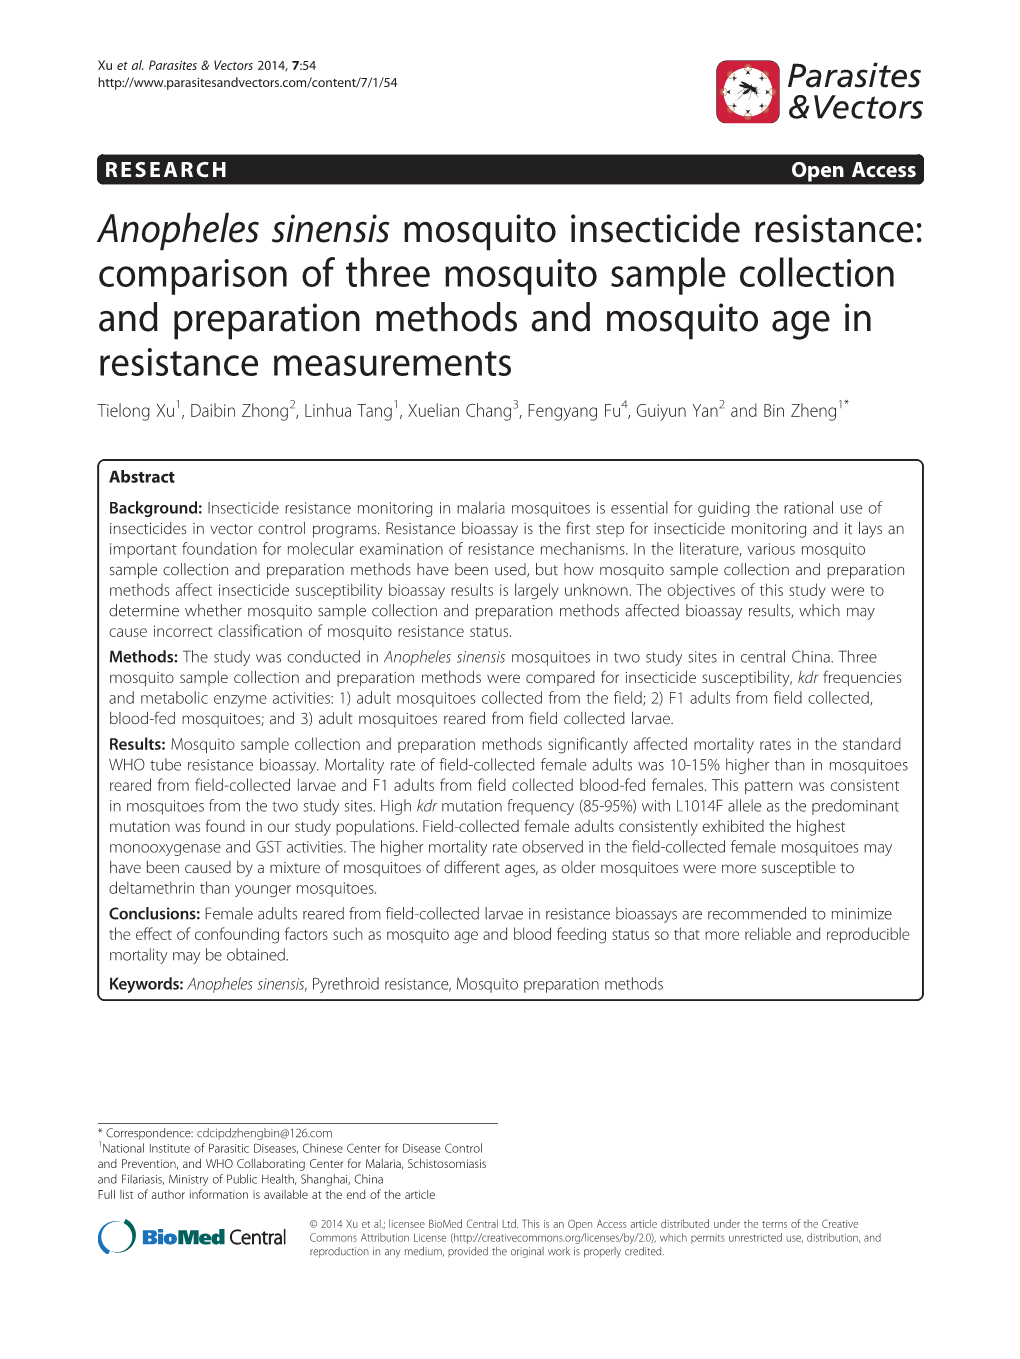 Anopheles Sinensis Mosquito Insecticide Resistance